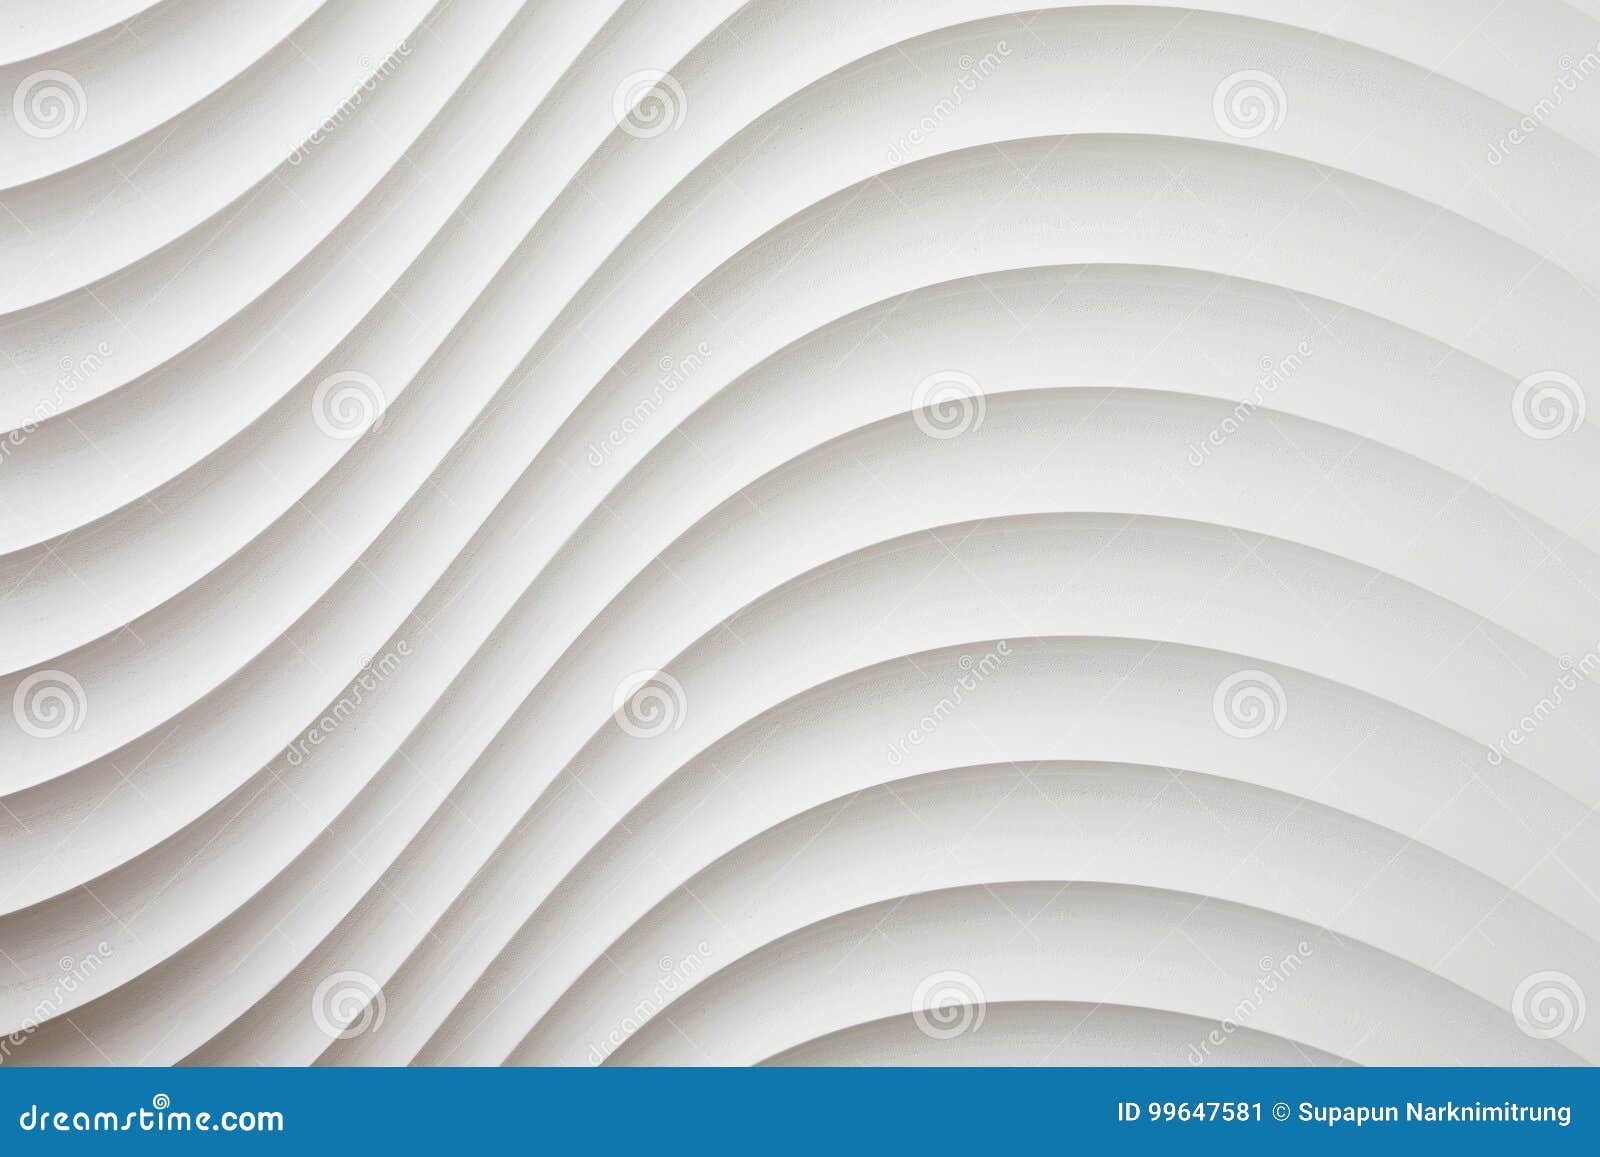 white wall texture, abstract pattern, wave wavy modern, geometric overlap layer background.